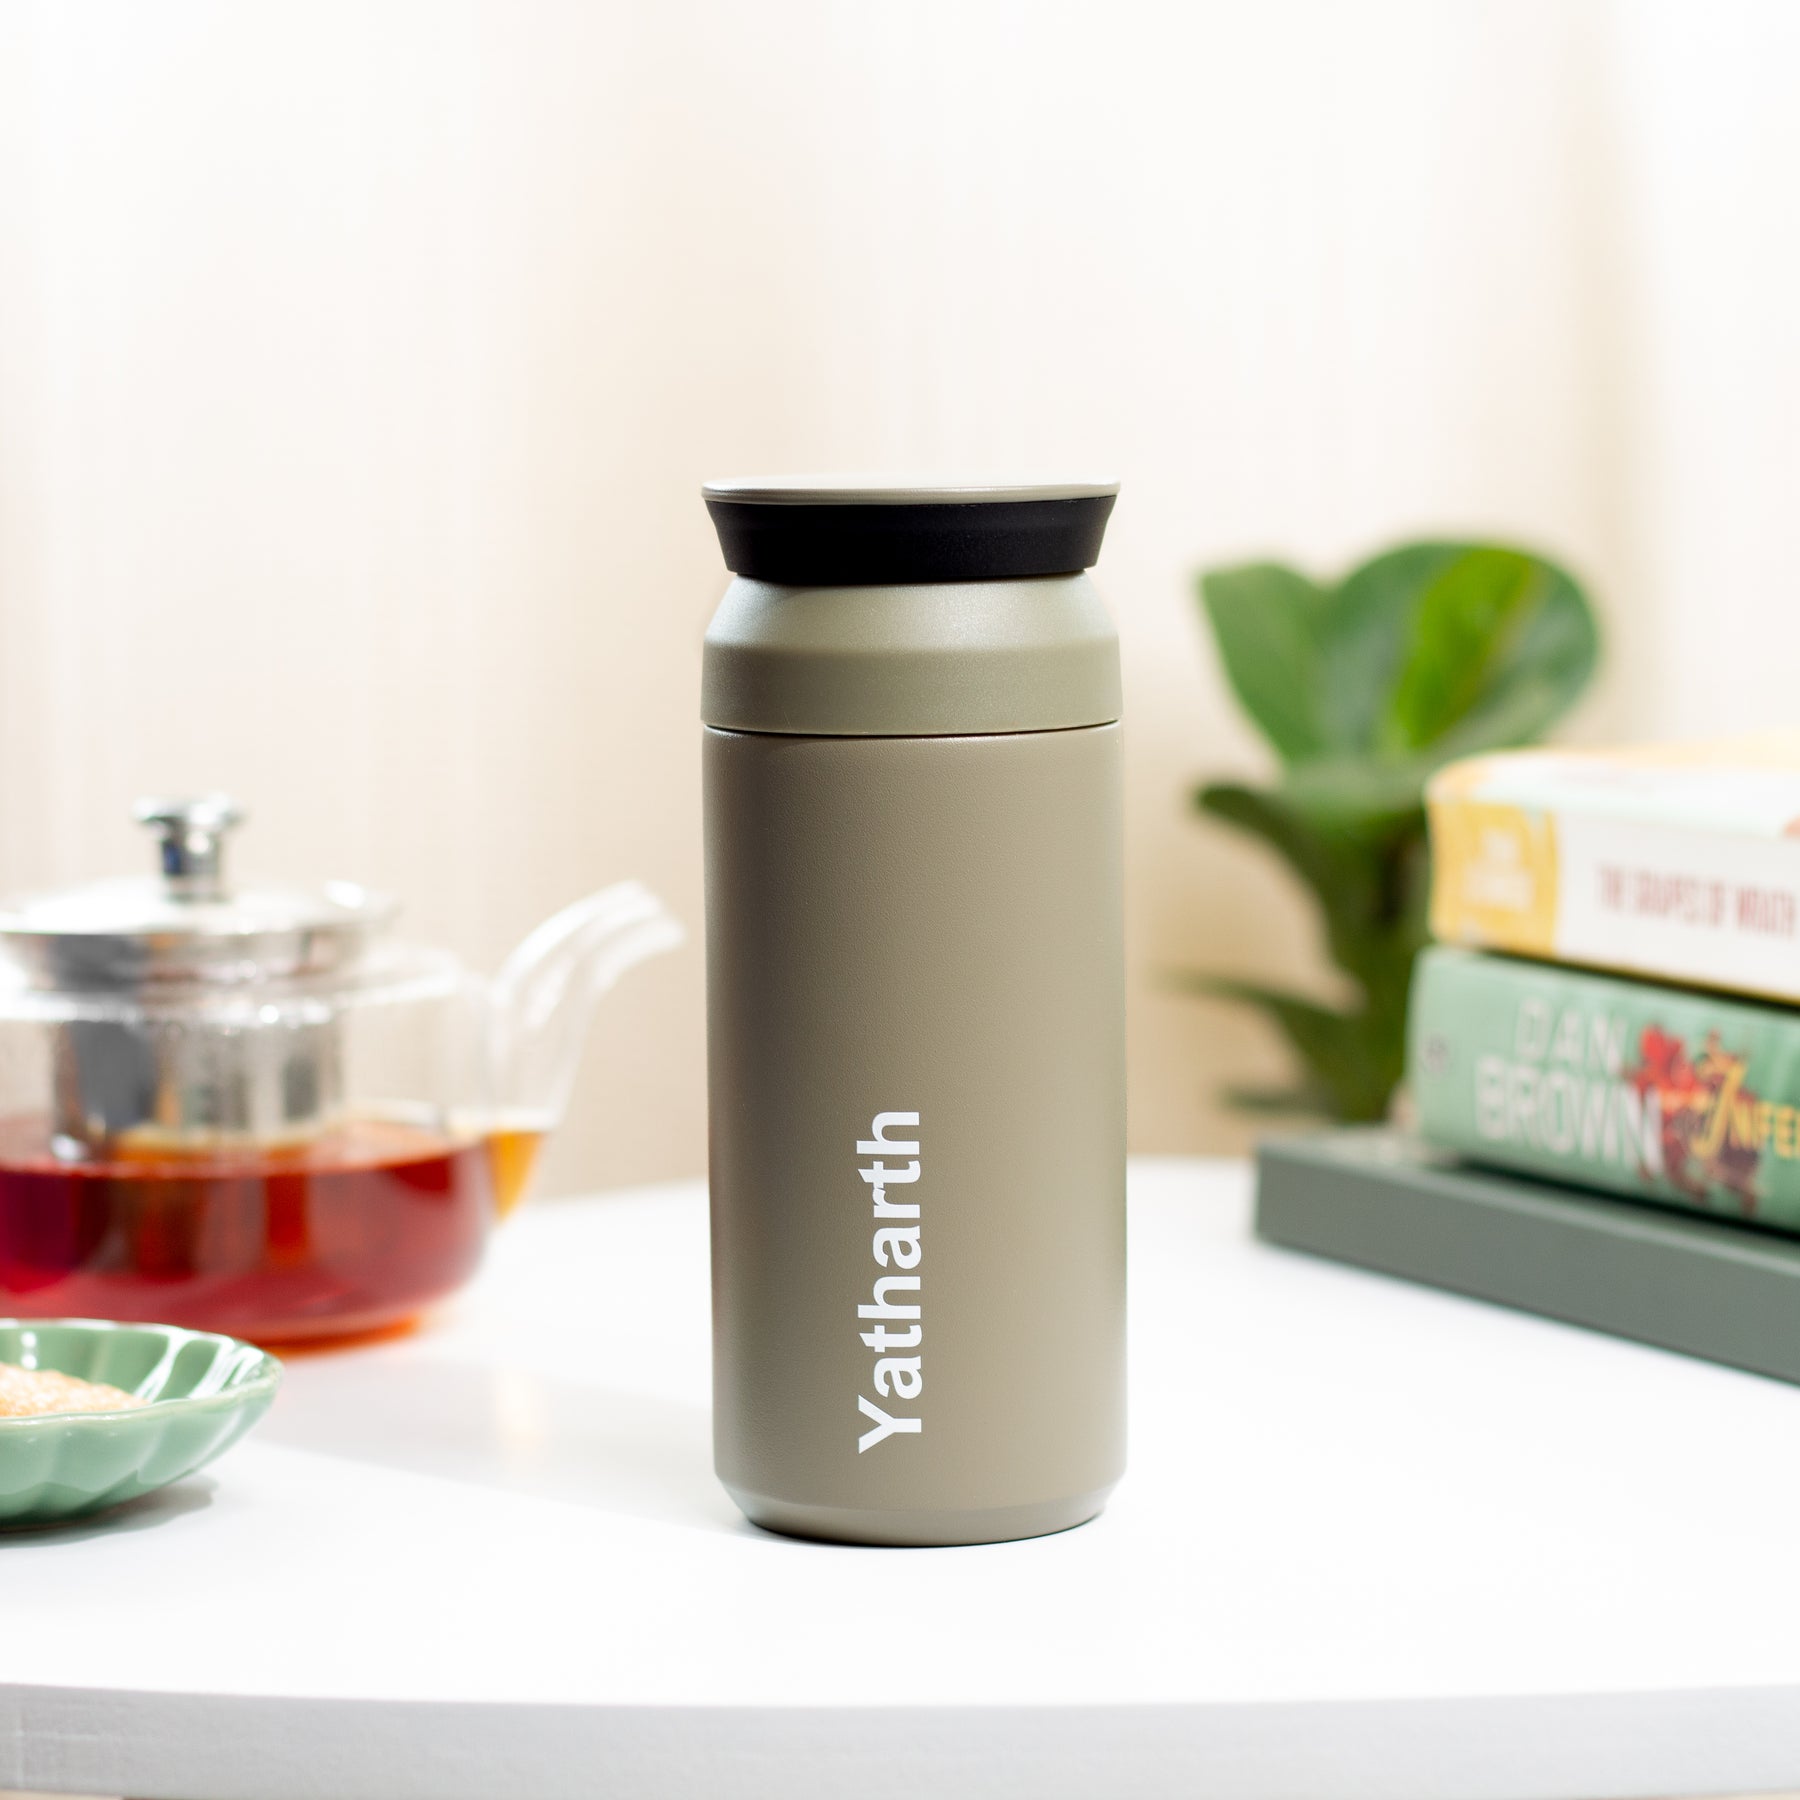 Personalised Insulated Coffee Tumbler- Olive